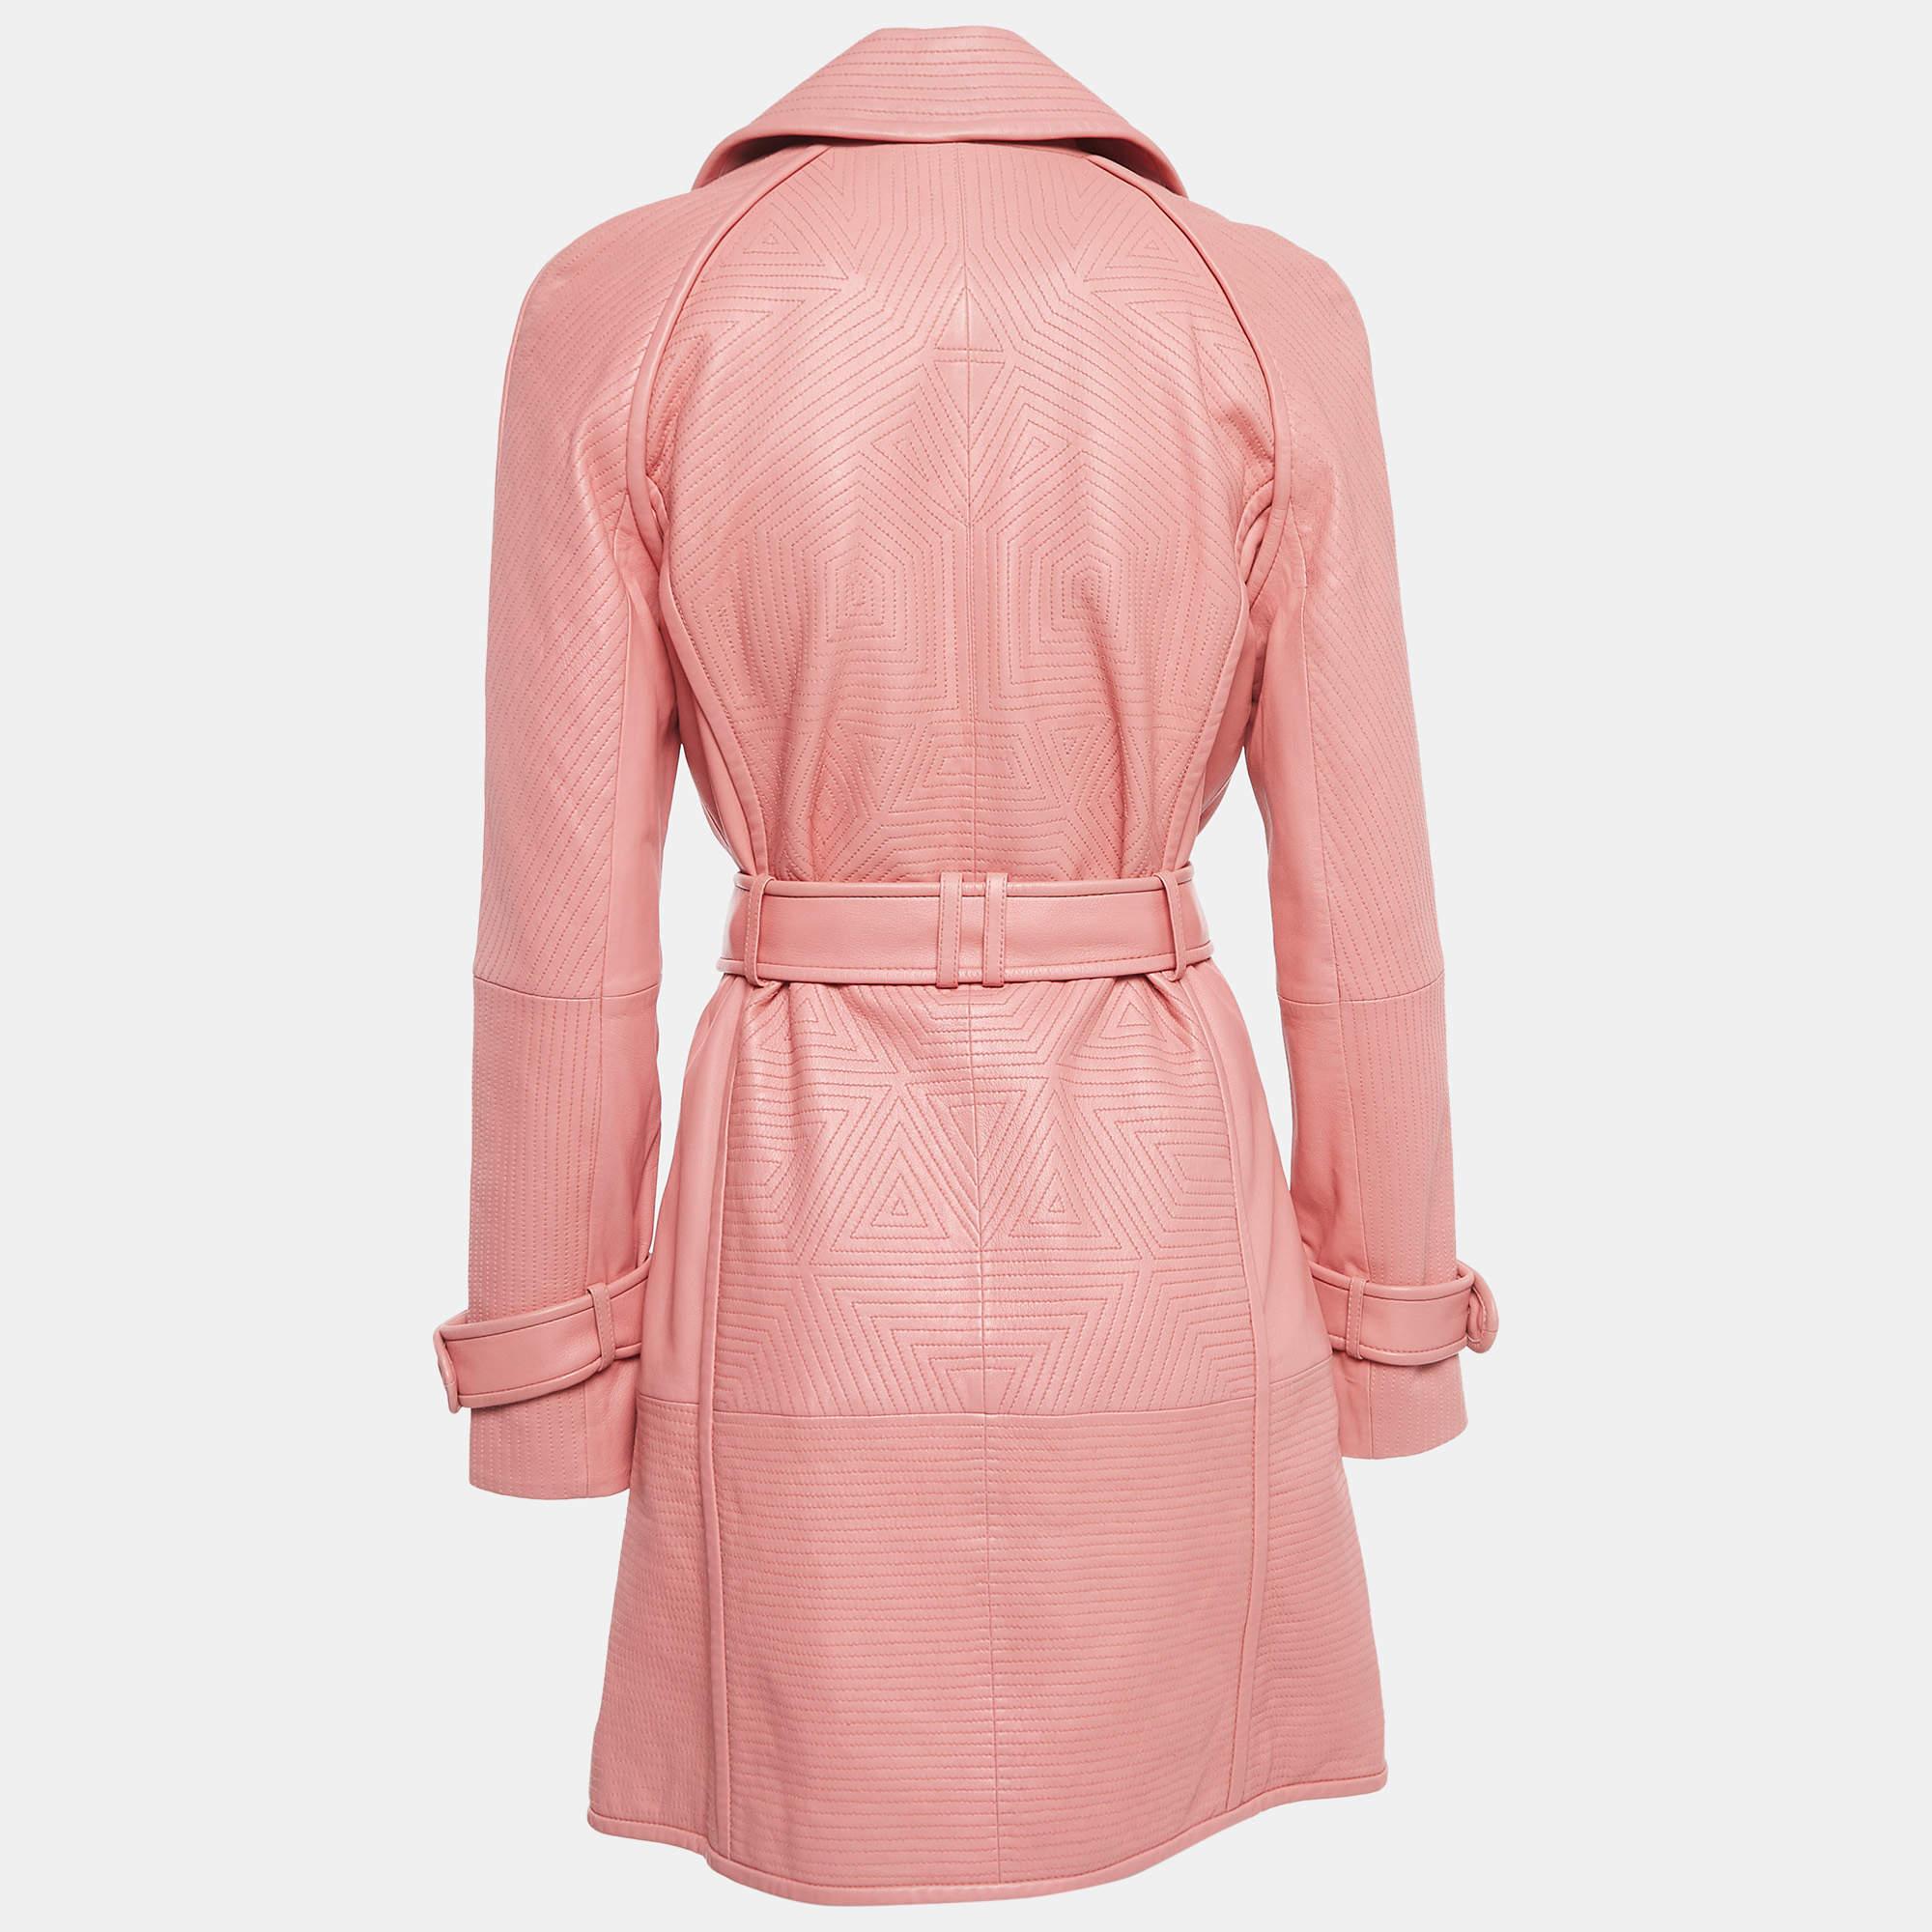 The Richards Radcliffe trench coat exudes sophistication with its luxurious pink leather and timeless double-breasted design. Its sleek silhouette, wide lapels, and waist belt combine for a statement piece that effortlessly blends classic elegance